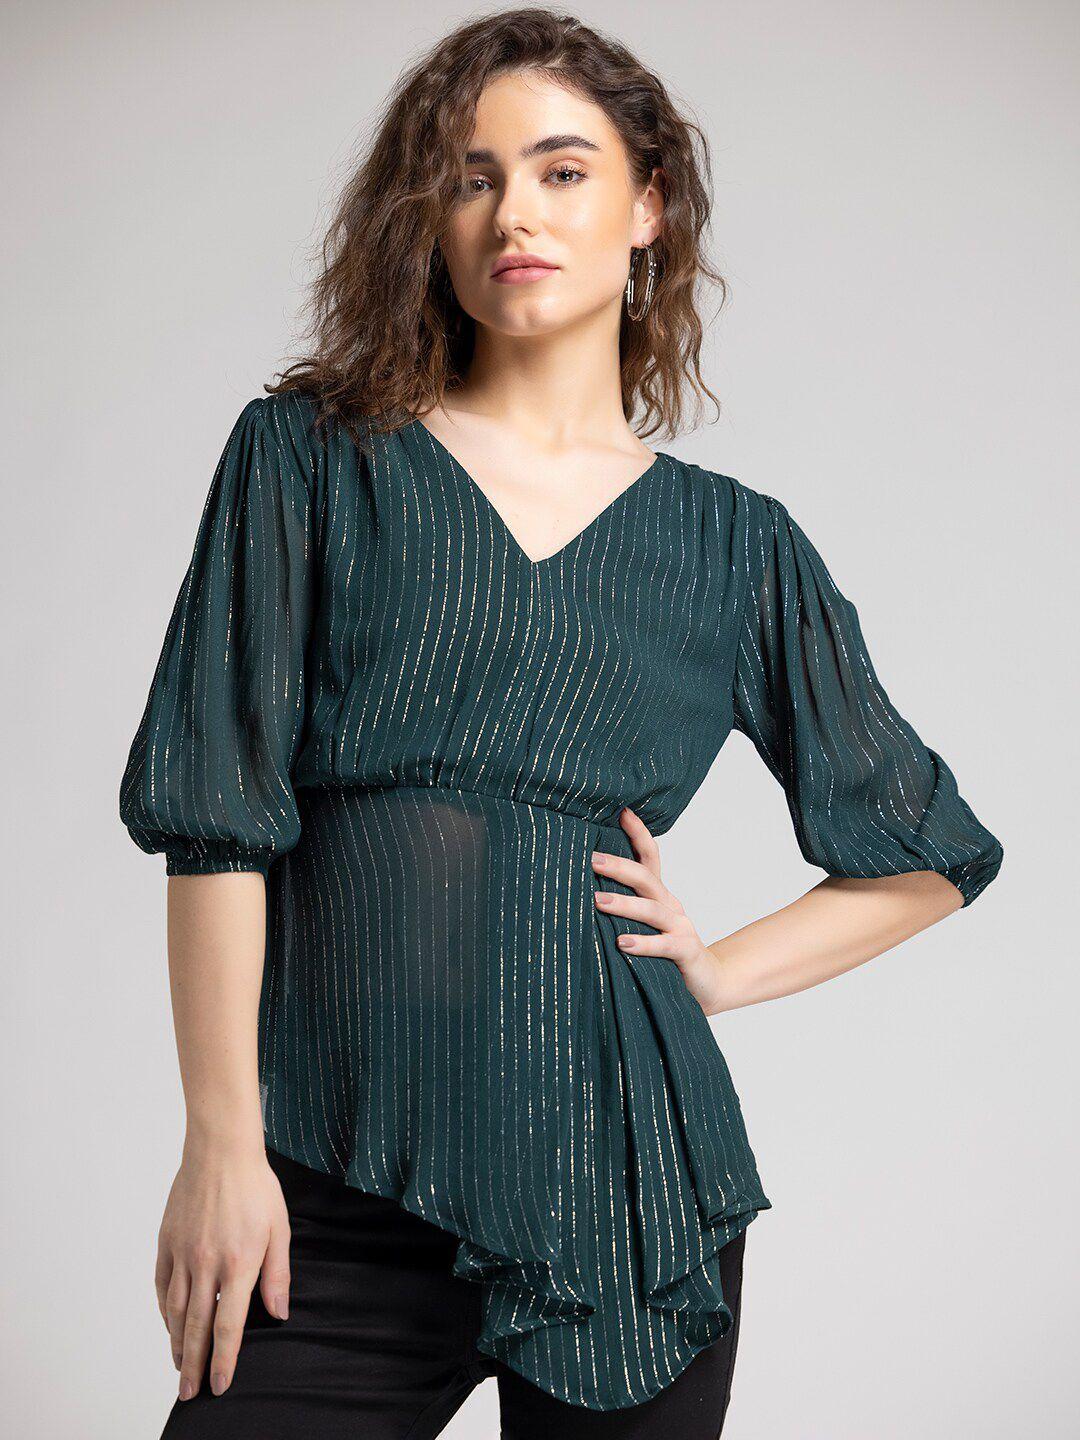 shaye striped puff sleeves sheen empire top